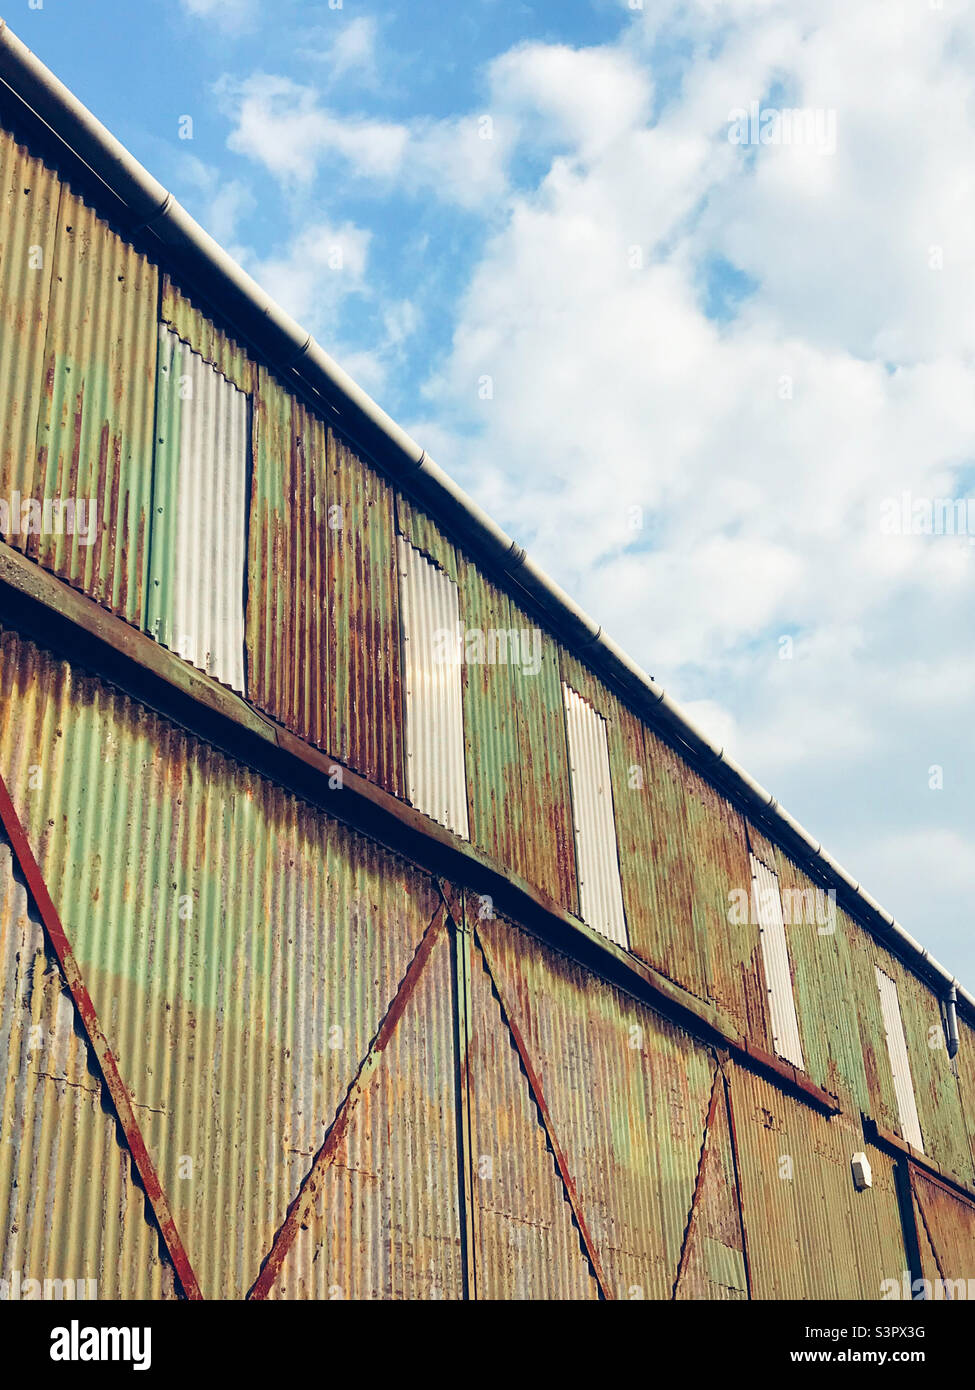 An old warehouse in Bristol clad in green corrugated metal Stock Photo